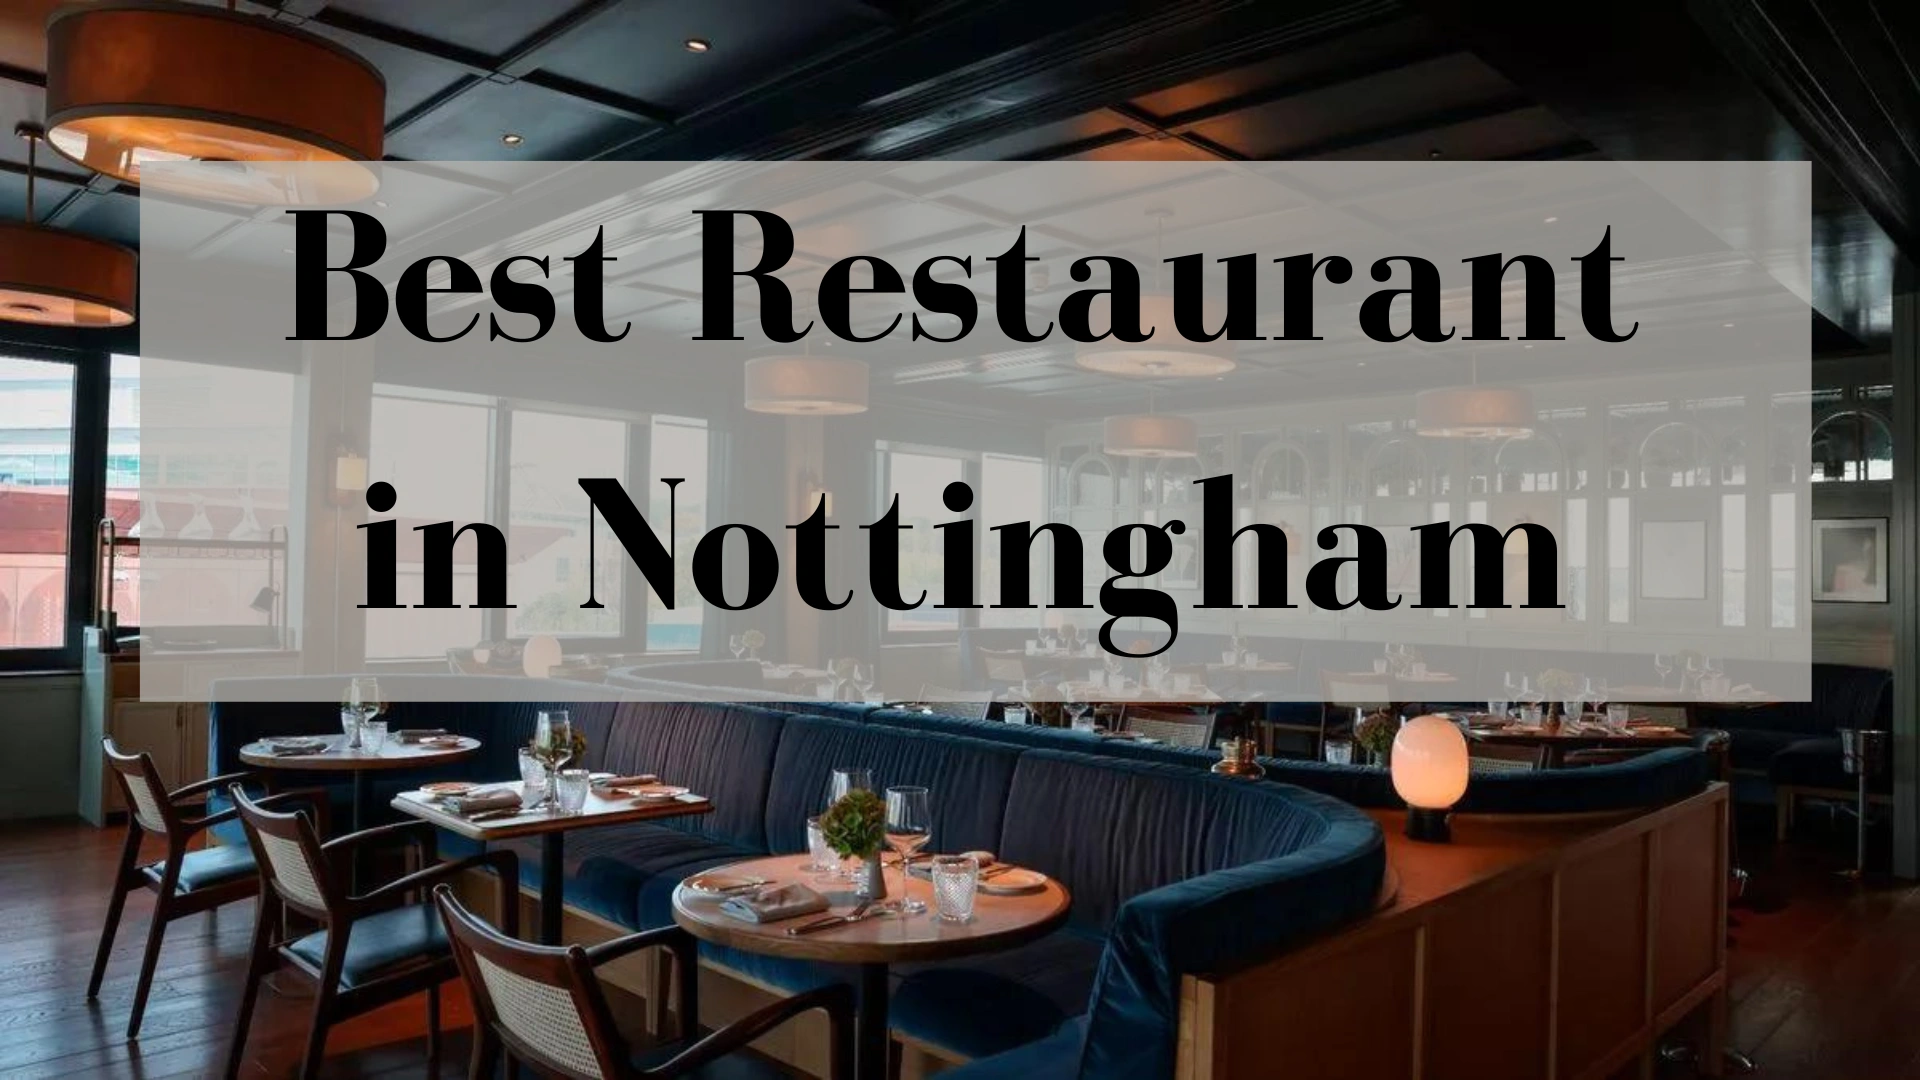 Feasting in Nottingham: VacationWaits’ Top 5 Restaurants You Must Visit